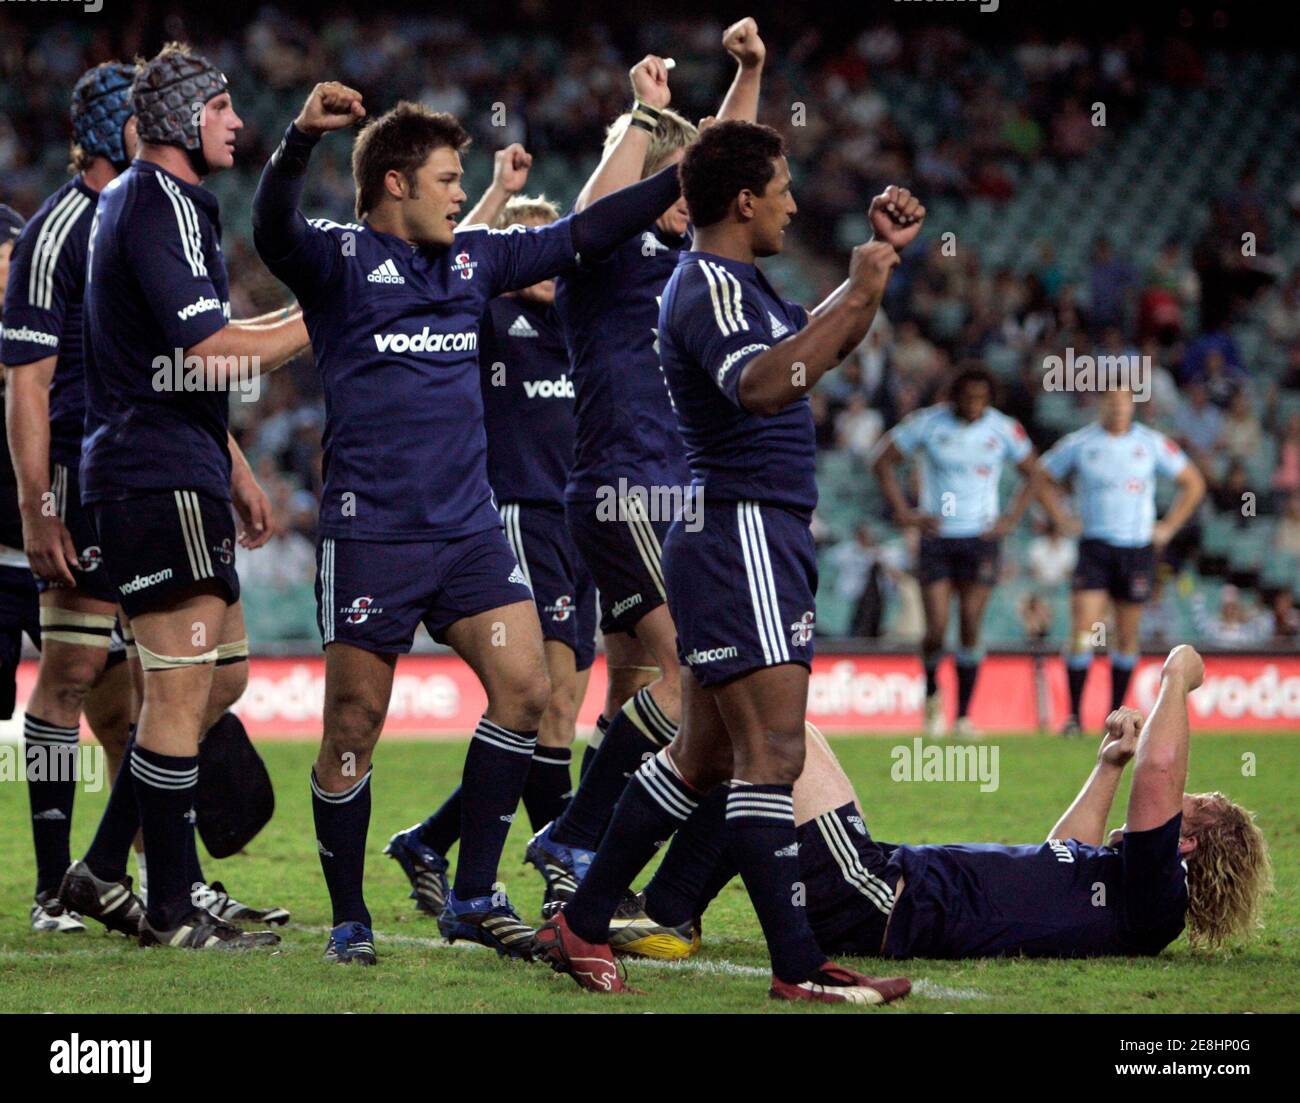 Stormers players from South Africa react after defeating the Waratahs from Australia in their Super 14 rugby union match in Sydney March 17, 2007. REUTERS/Will Burgess   (AUSTRALIA) Stock Photo